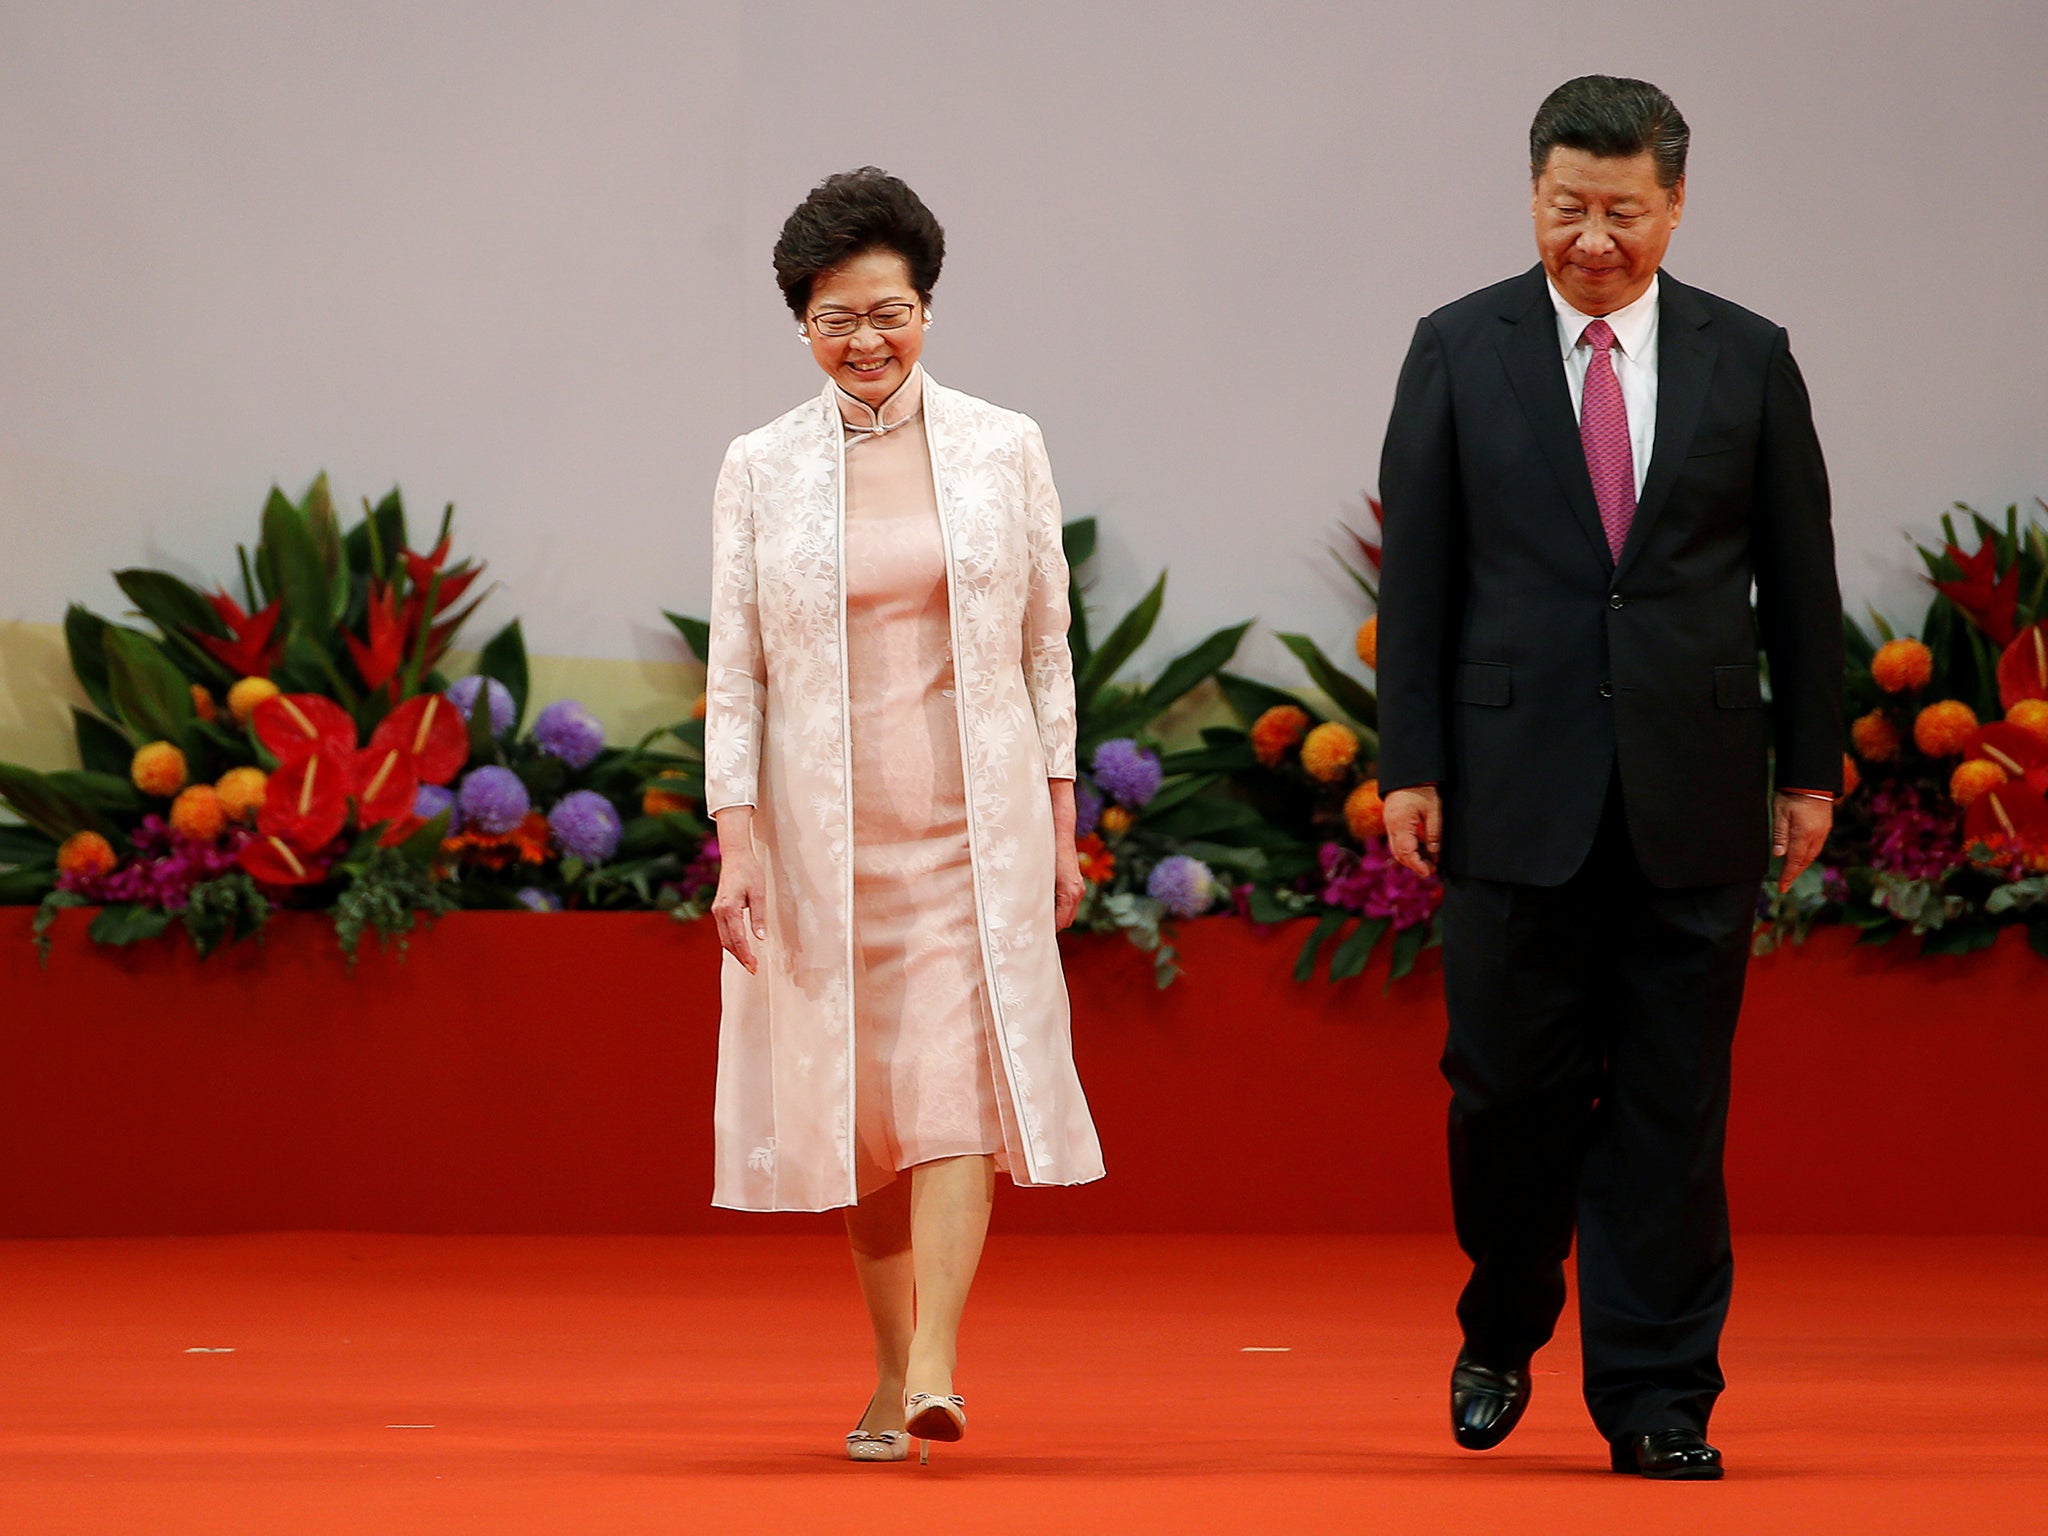 Hong Kong Chief Executive Carrie Lam (L) and Chinese President Xi Jinping walk on the podium during the 20th anniversary of Hong Kong's handover from British to Chinese rule